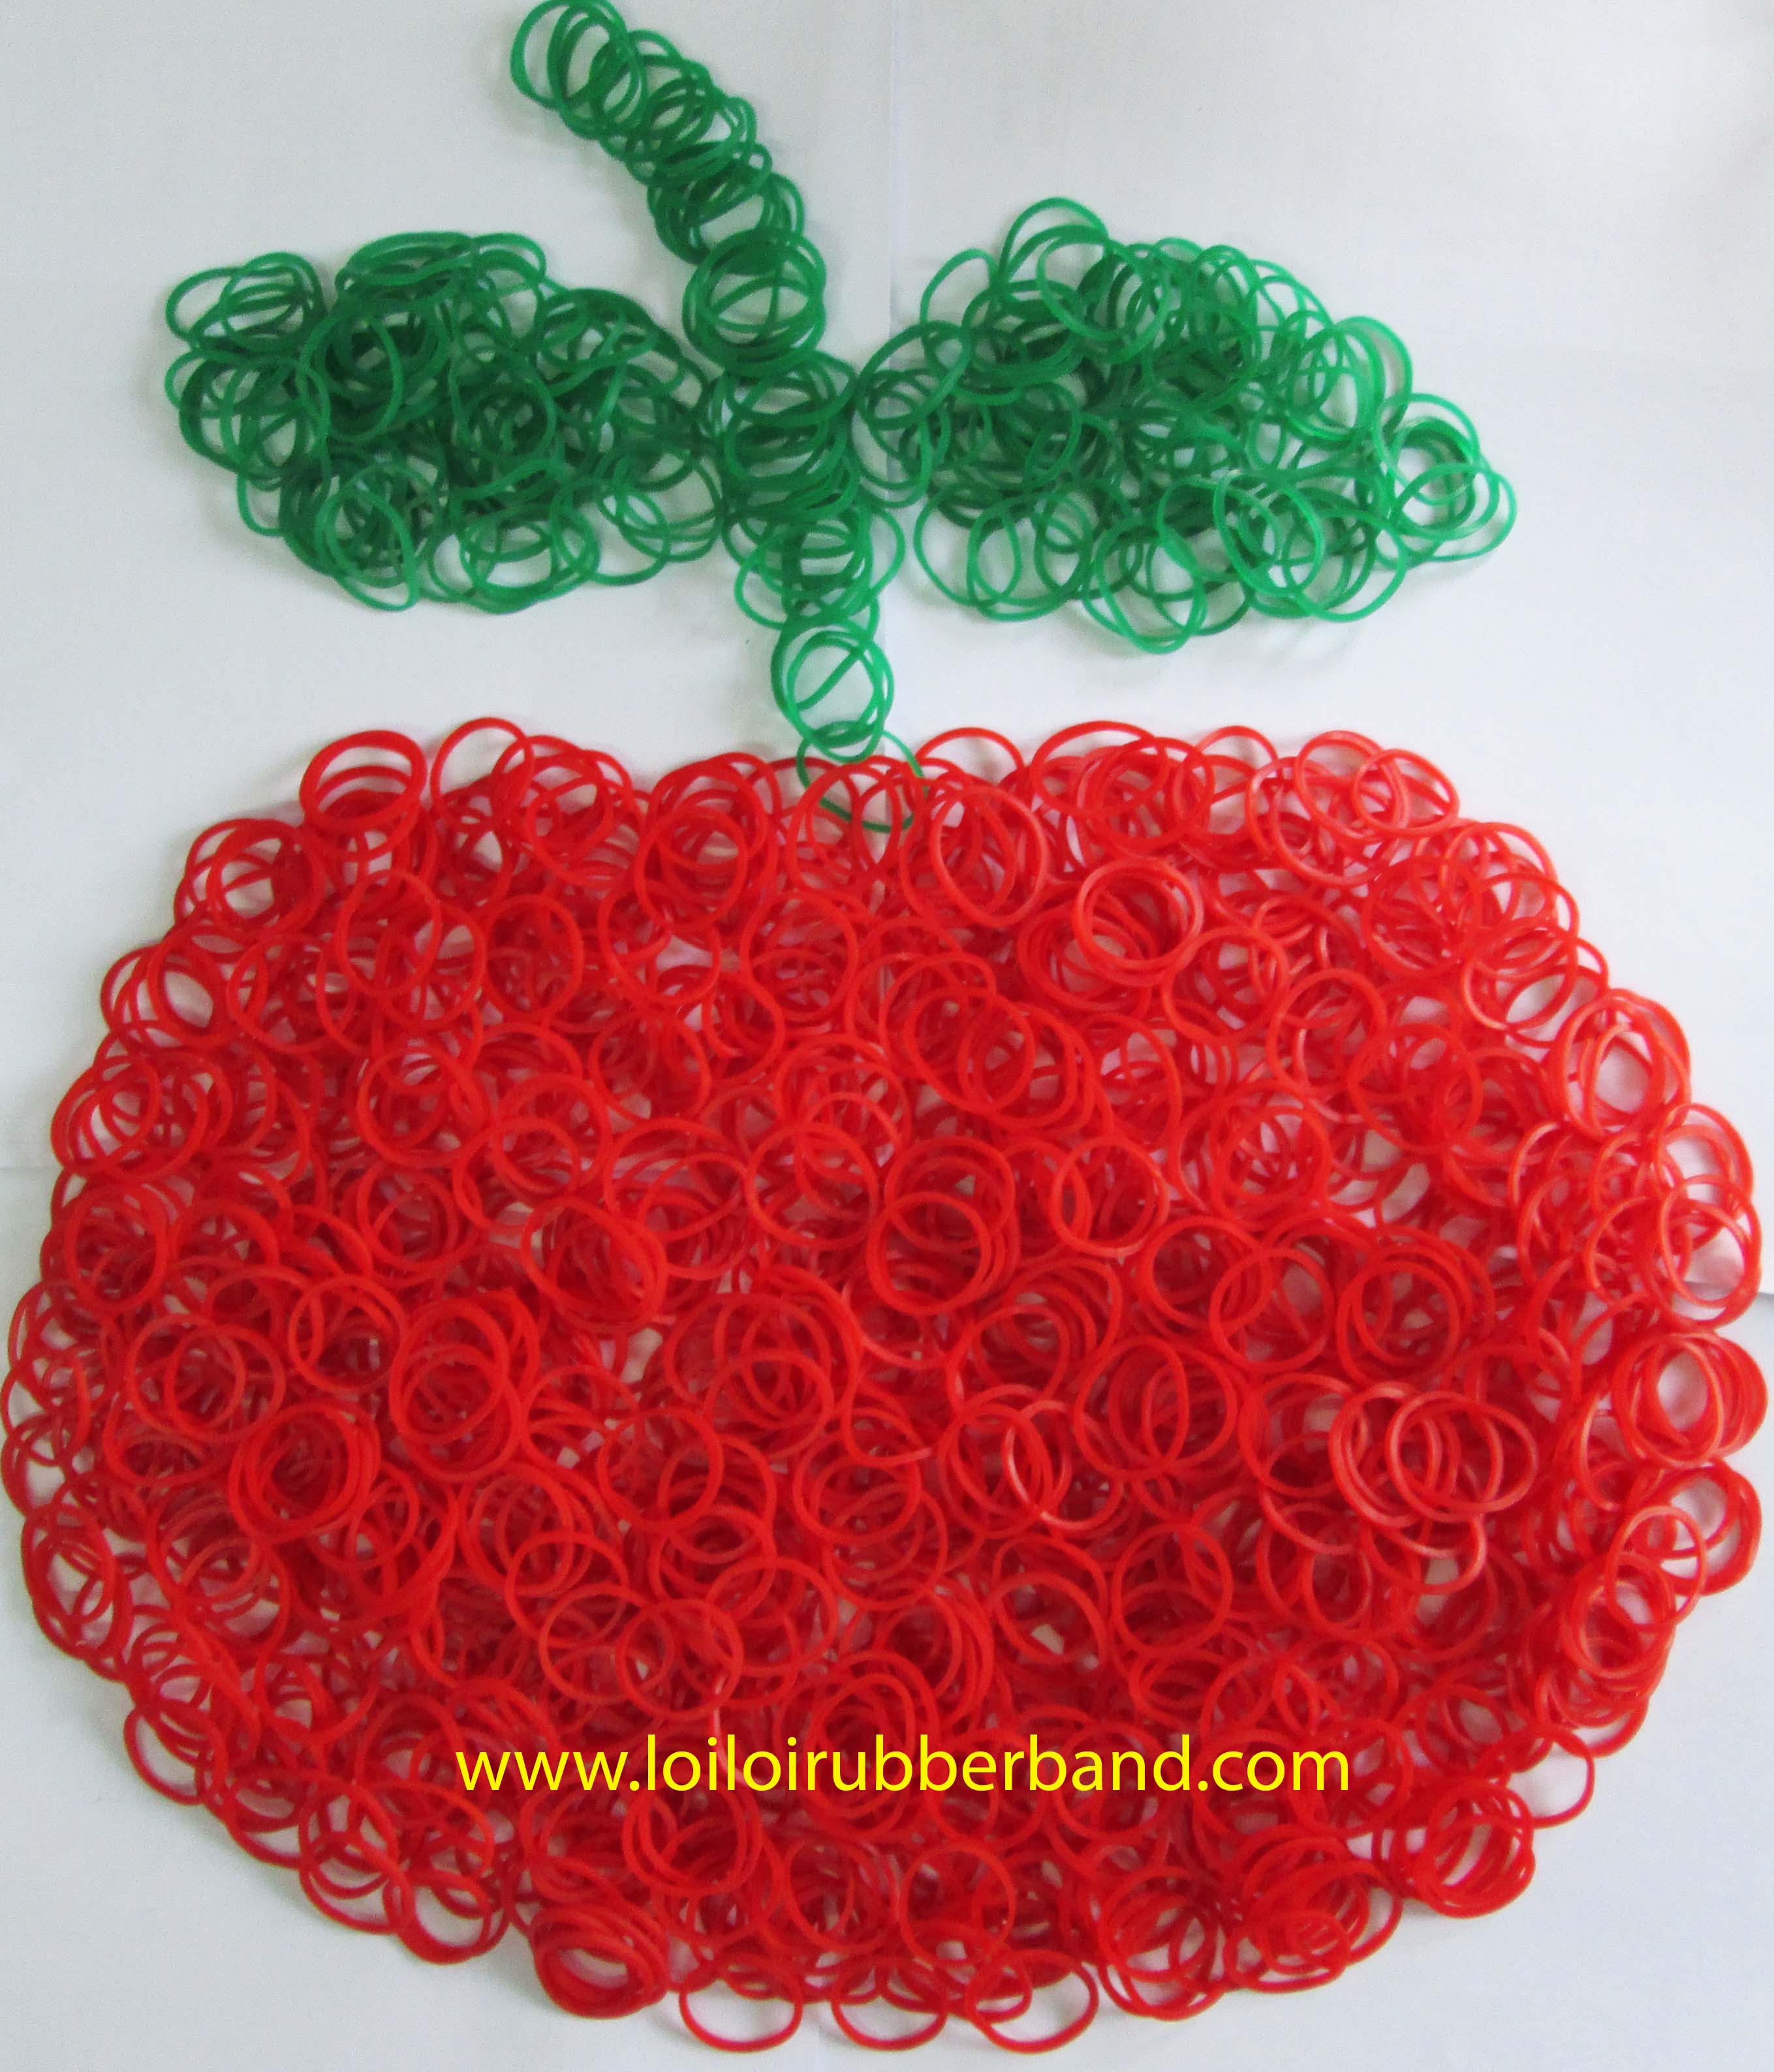 Size 008 transparent red rubber band - Green natural rubber band eco-friendly new colorful small size wholesale rubber band 